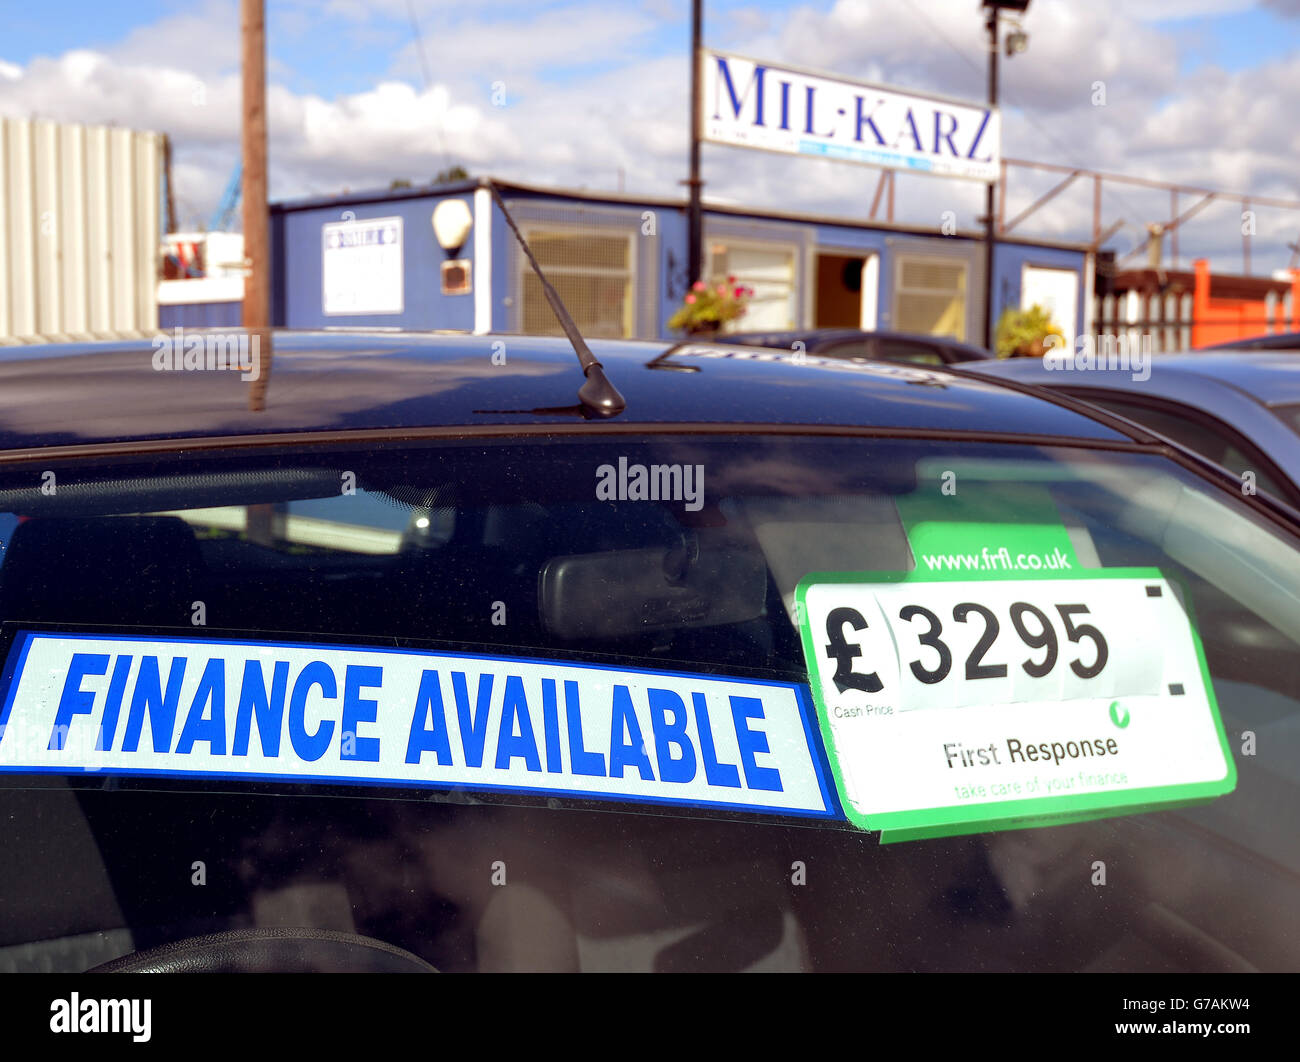 General view of signage at Mil Karz used car sales in Aveley, Essex Stock Photo